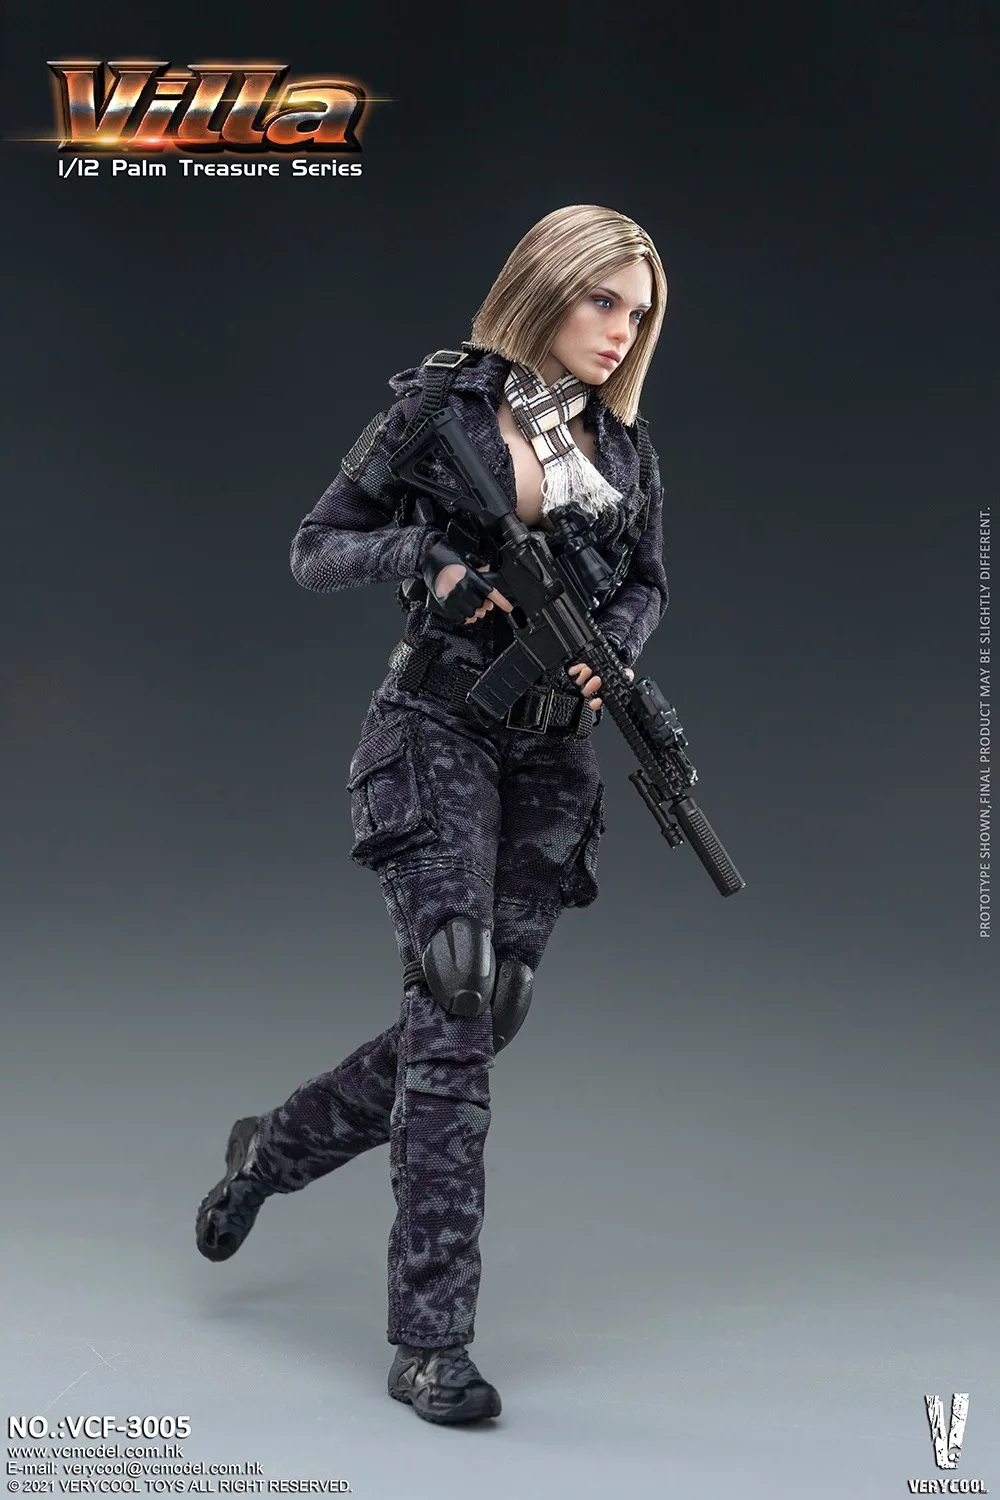 VERYCOOL VCF-3005 1/12 MC Female Soldier Villa Collection Action Figure